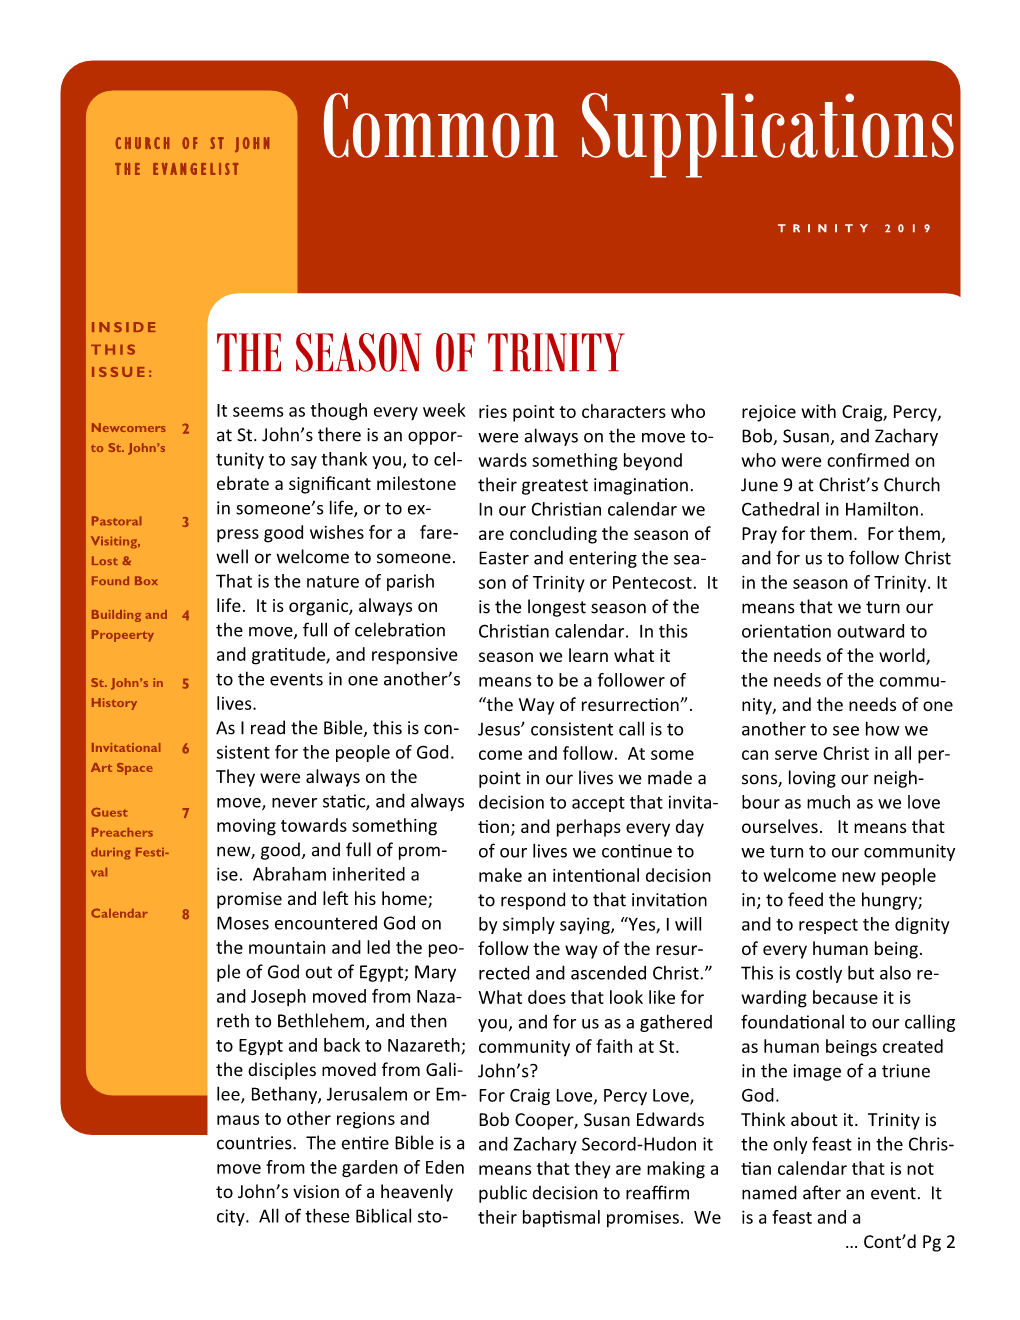 Trinity Common Supplications Newsletter